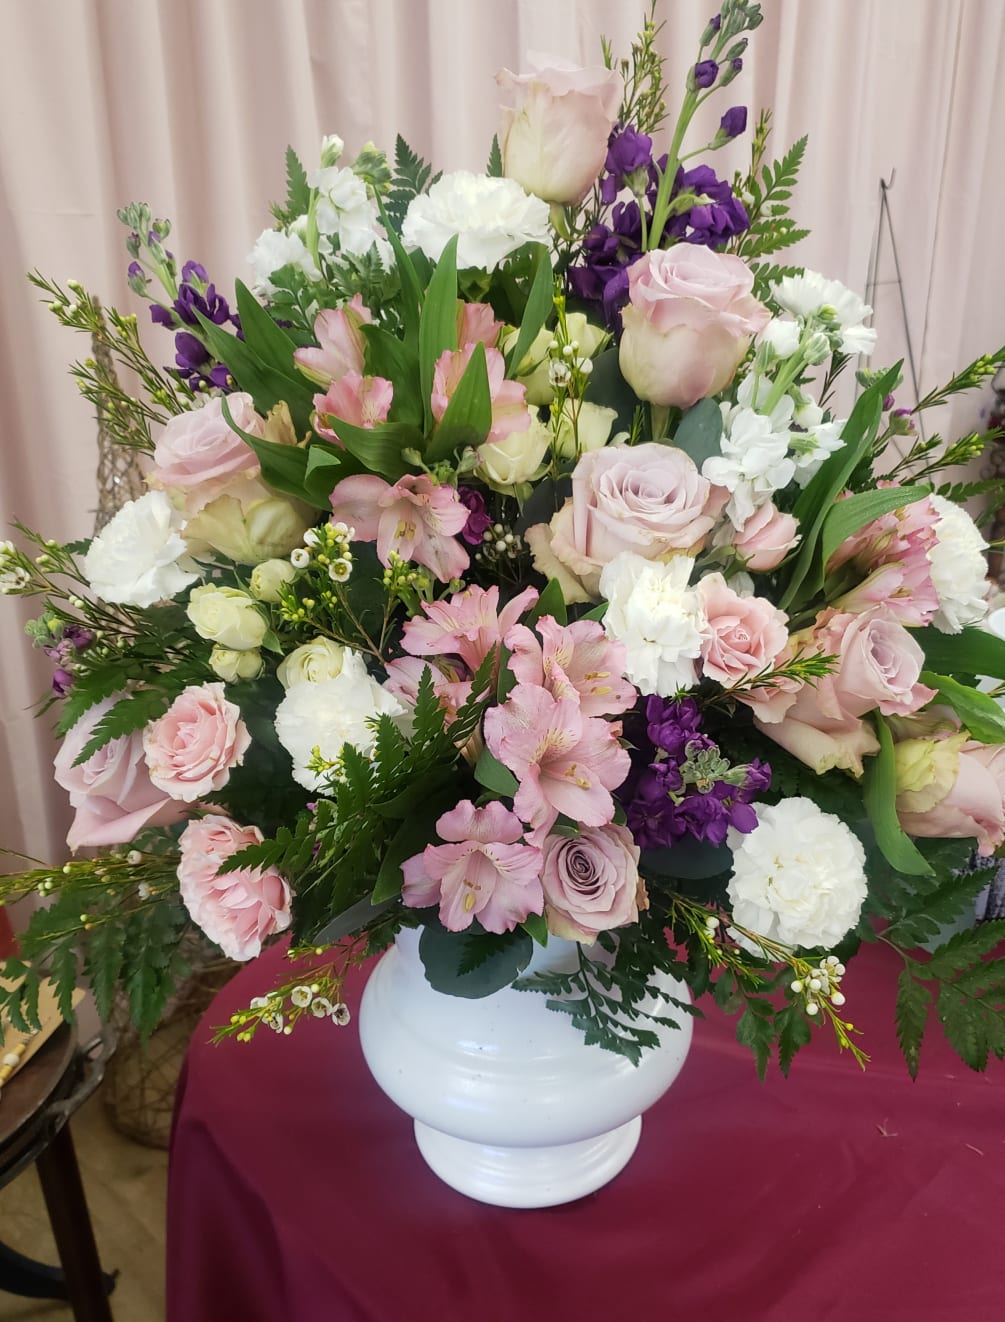 Stunning, yet sweet sympathy piece with pale pink and purple roses, white